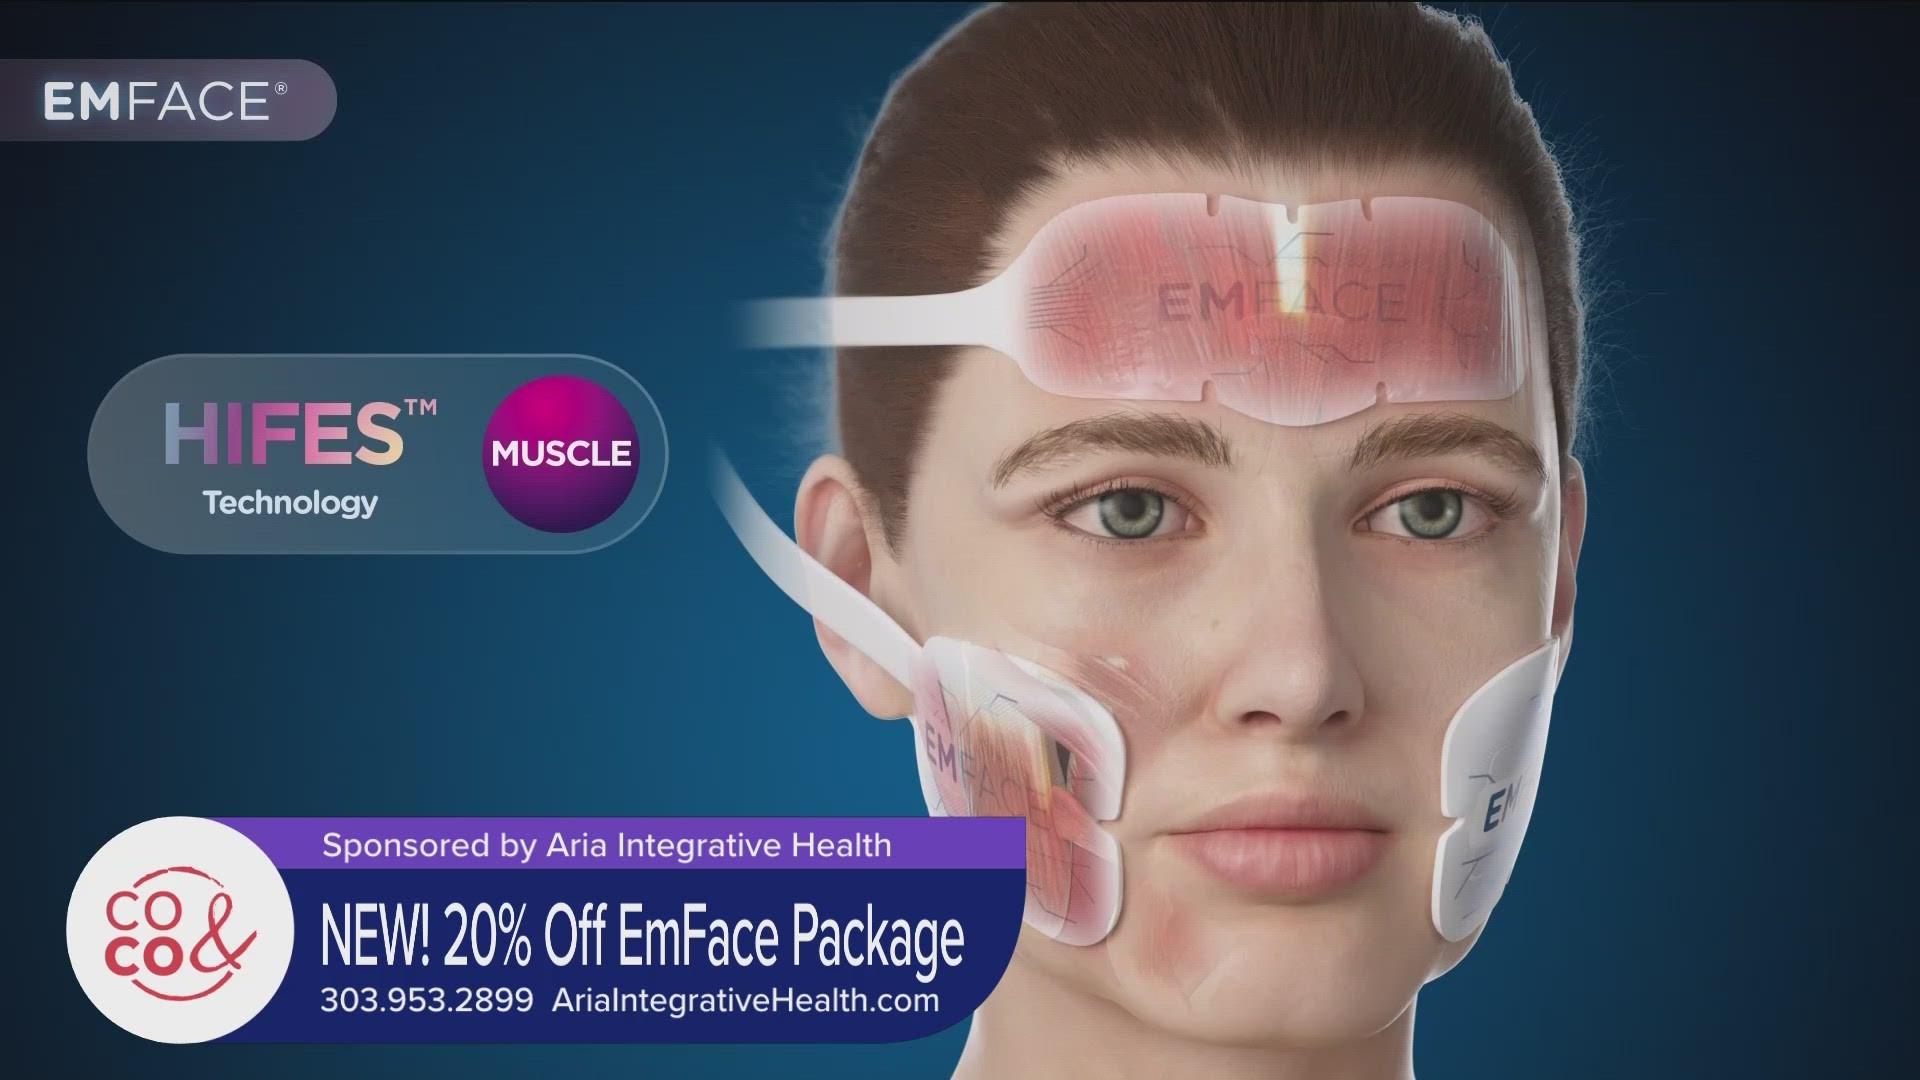 Call Aria now for 20% off an EmFace package and free consultation! That number is 303.953.2899. You can also visit AriaIntegrativeHealth.com.**PAID CONTENT**